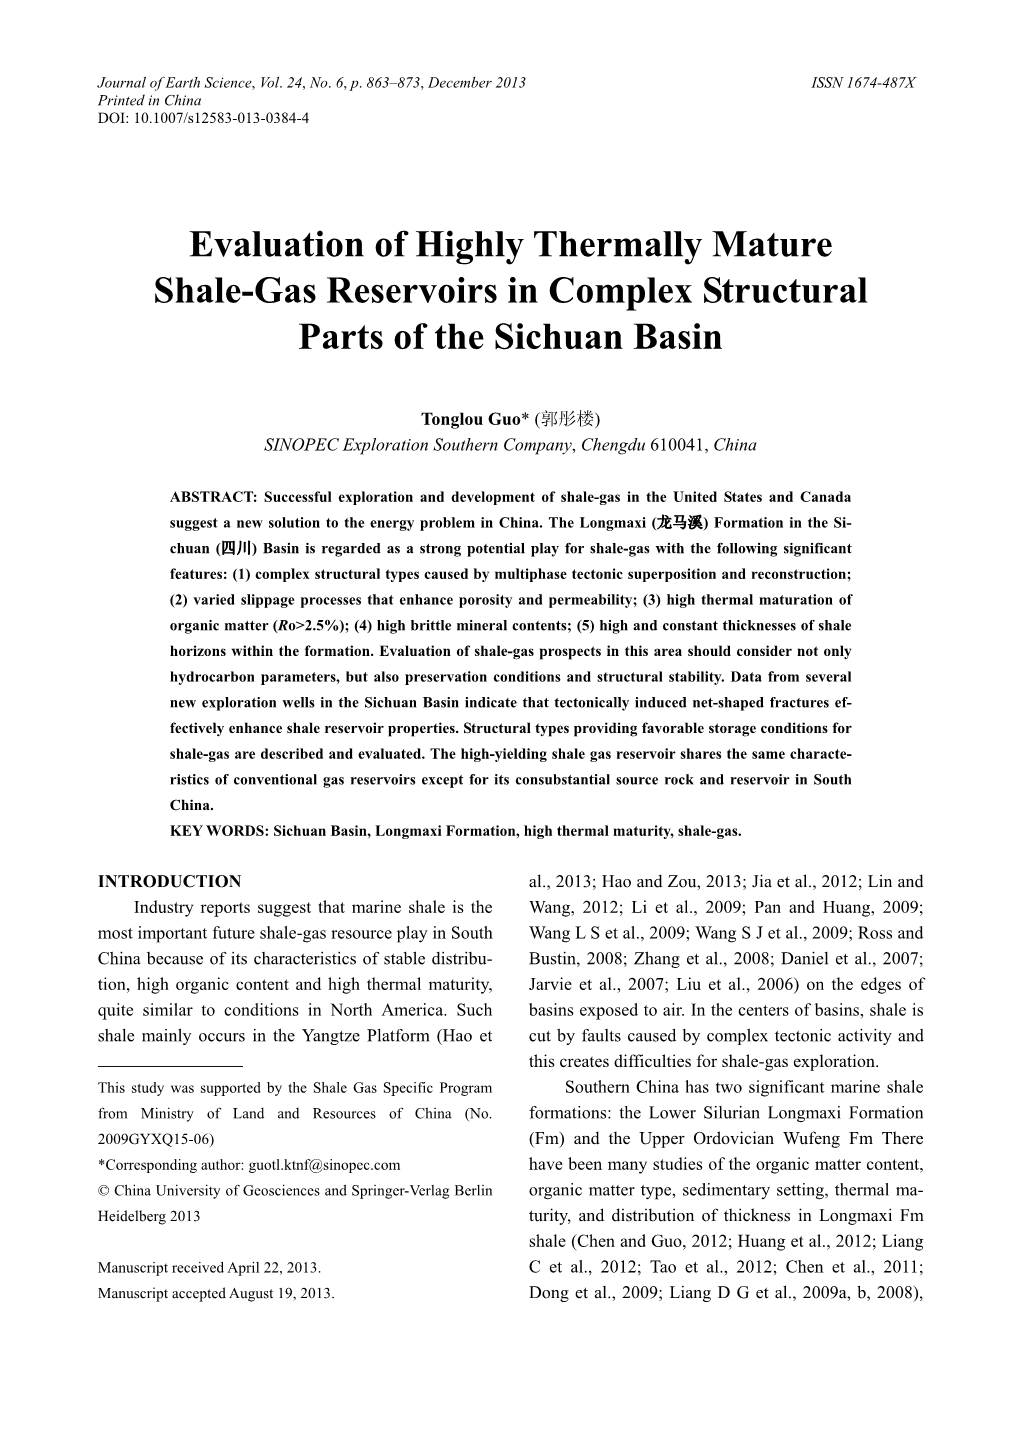 Evaluation of Highly Thermally Mature Shale-Gas Reservoirs in Complex Structural Parts of the Sichuan Basin